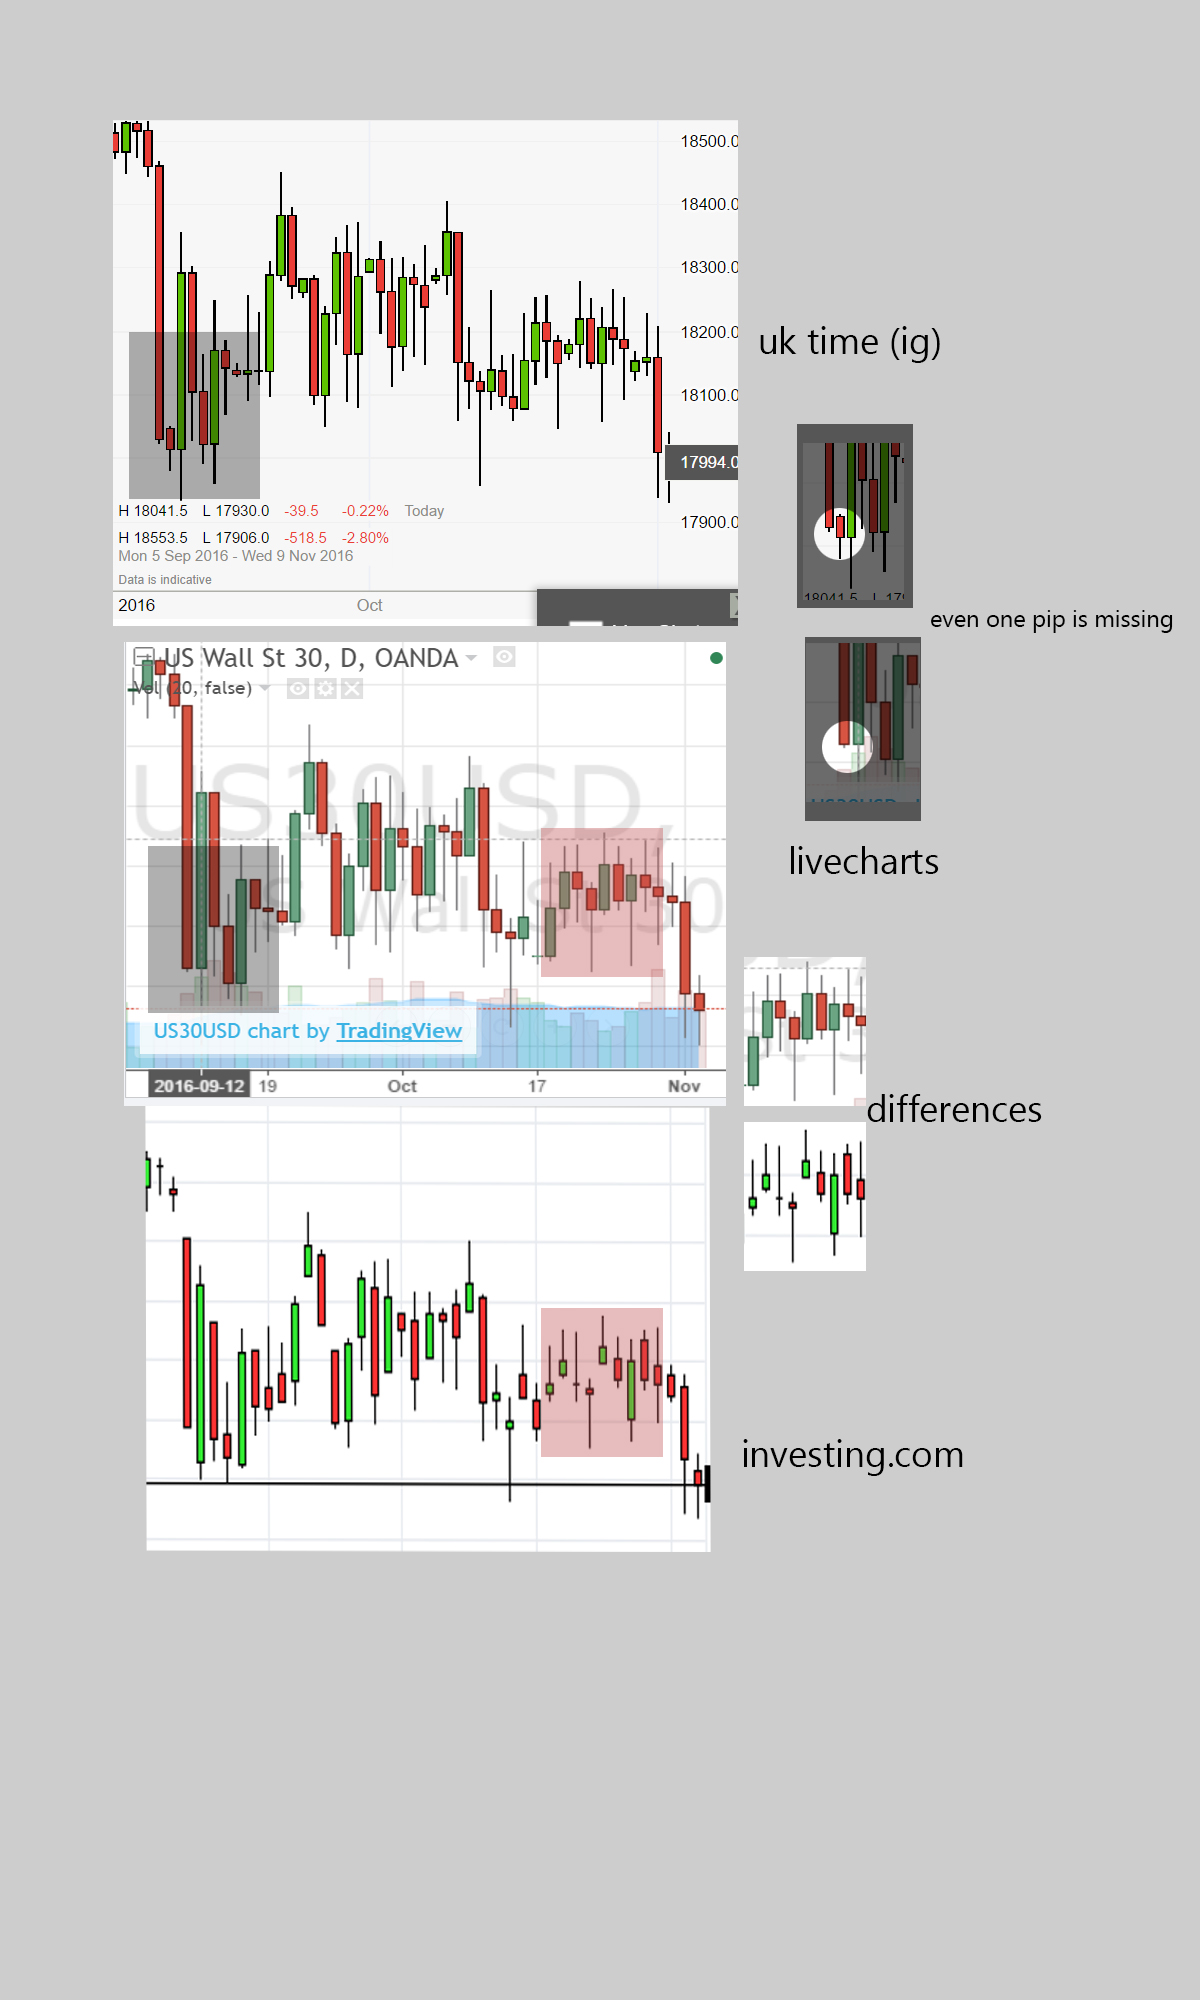 Click image for larger version. Name: candlestick 2.jpg Views: N/A Size: 540.7 KB